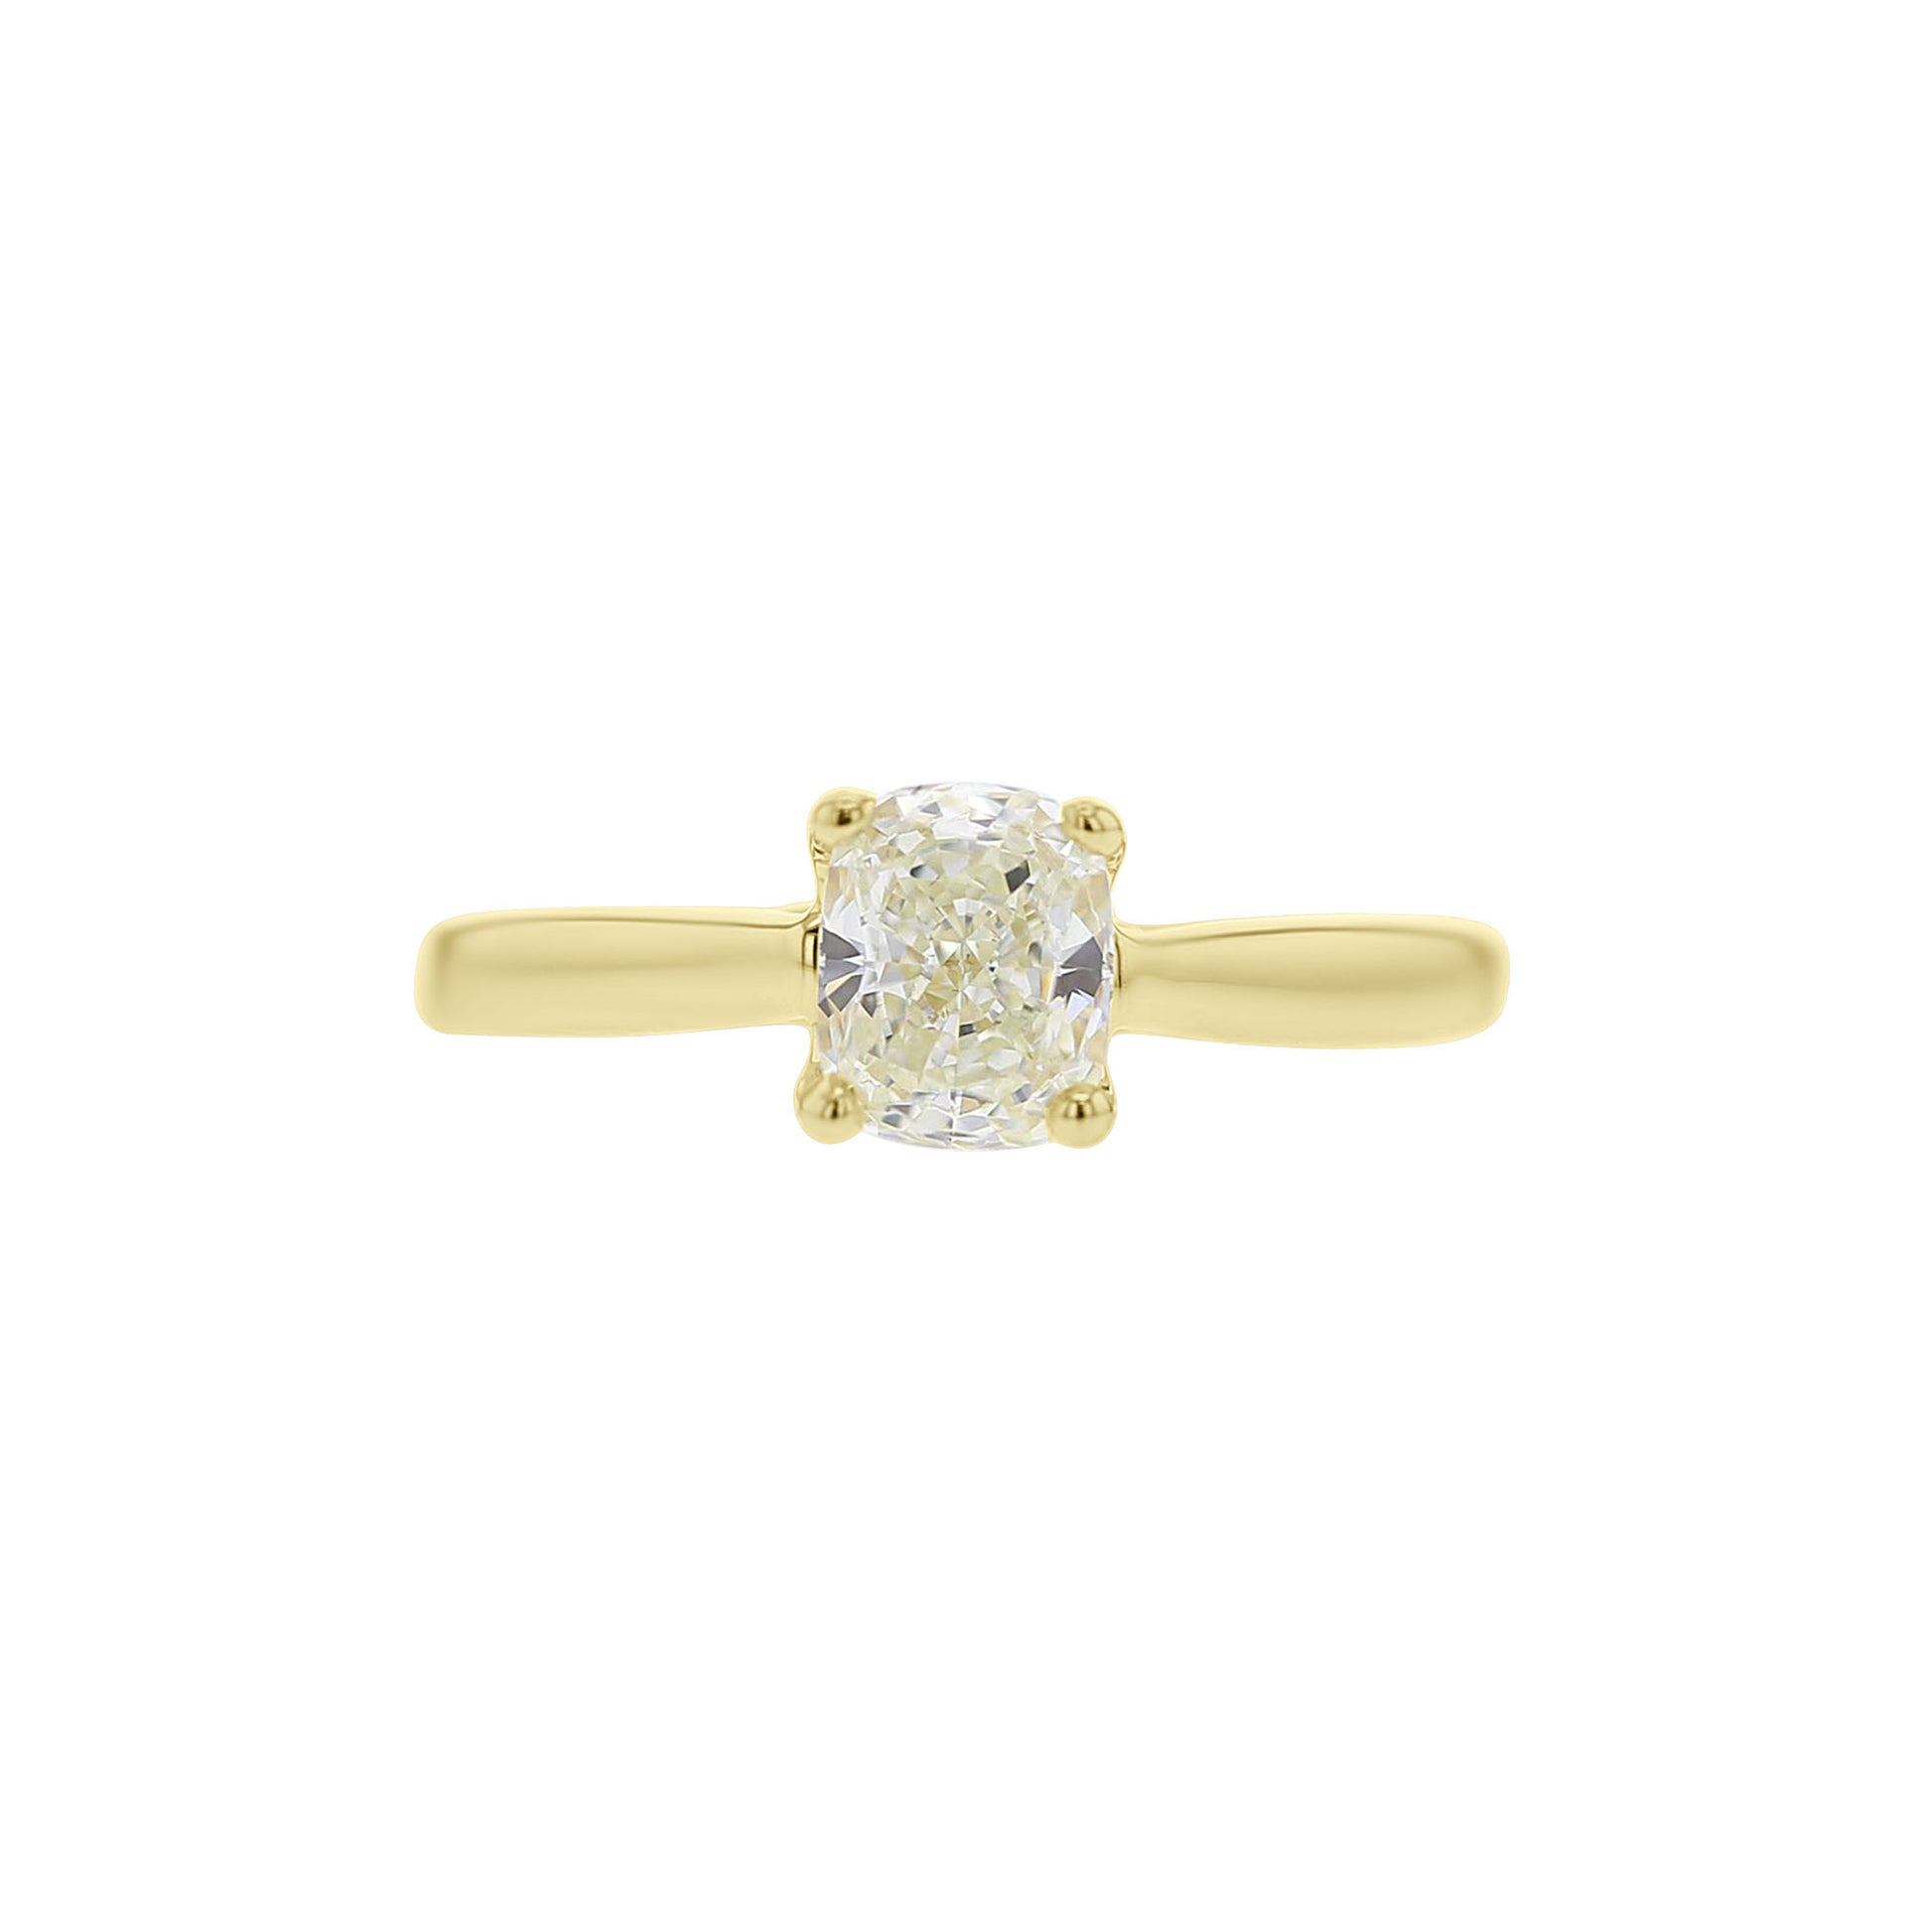 Kinsey Ready for Love Certified Diamond Engagement Ring 1 1/20ct